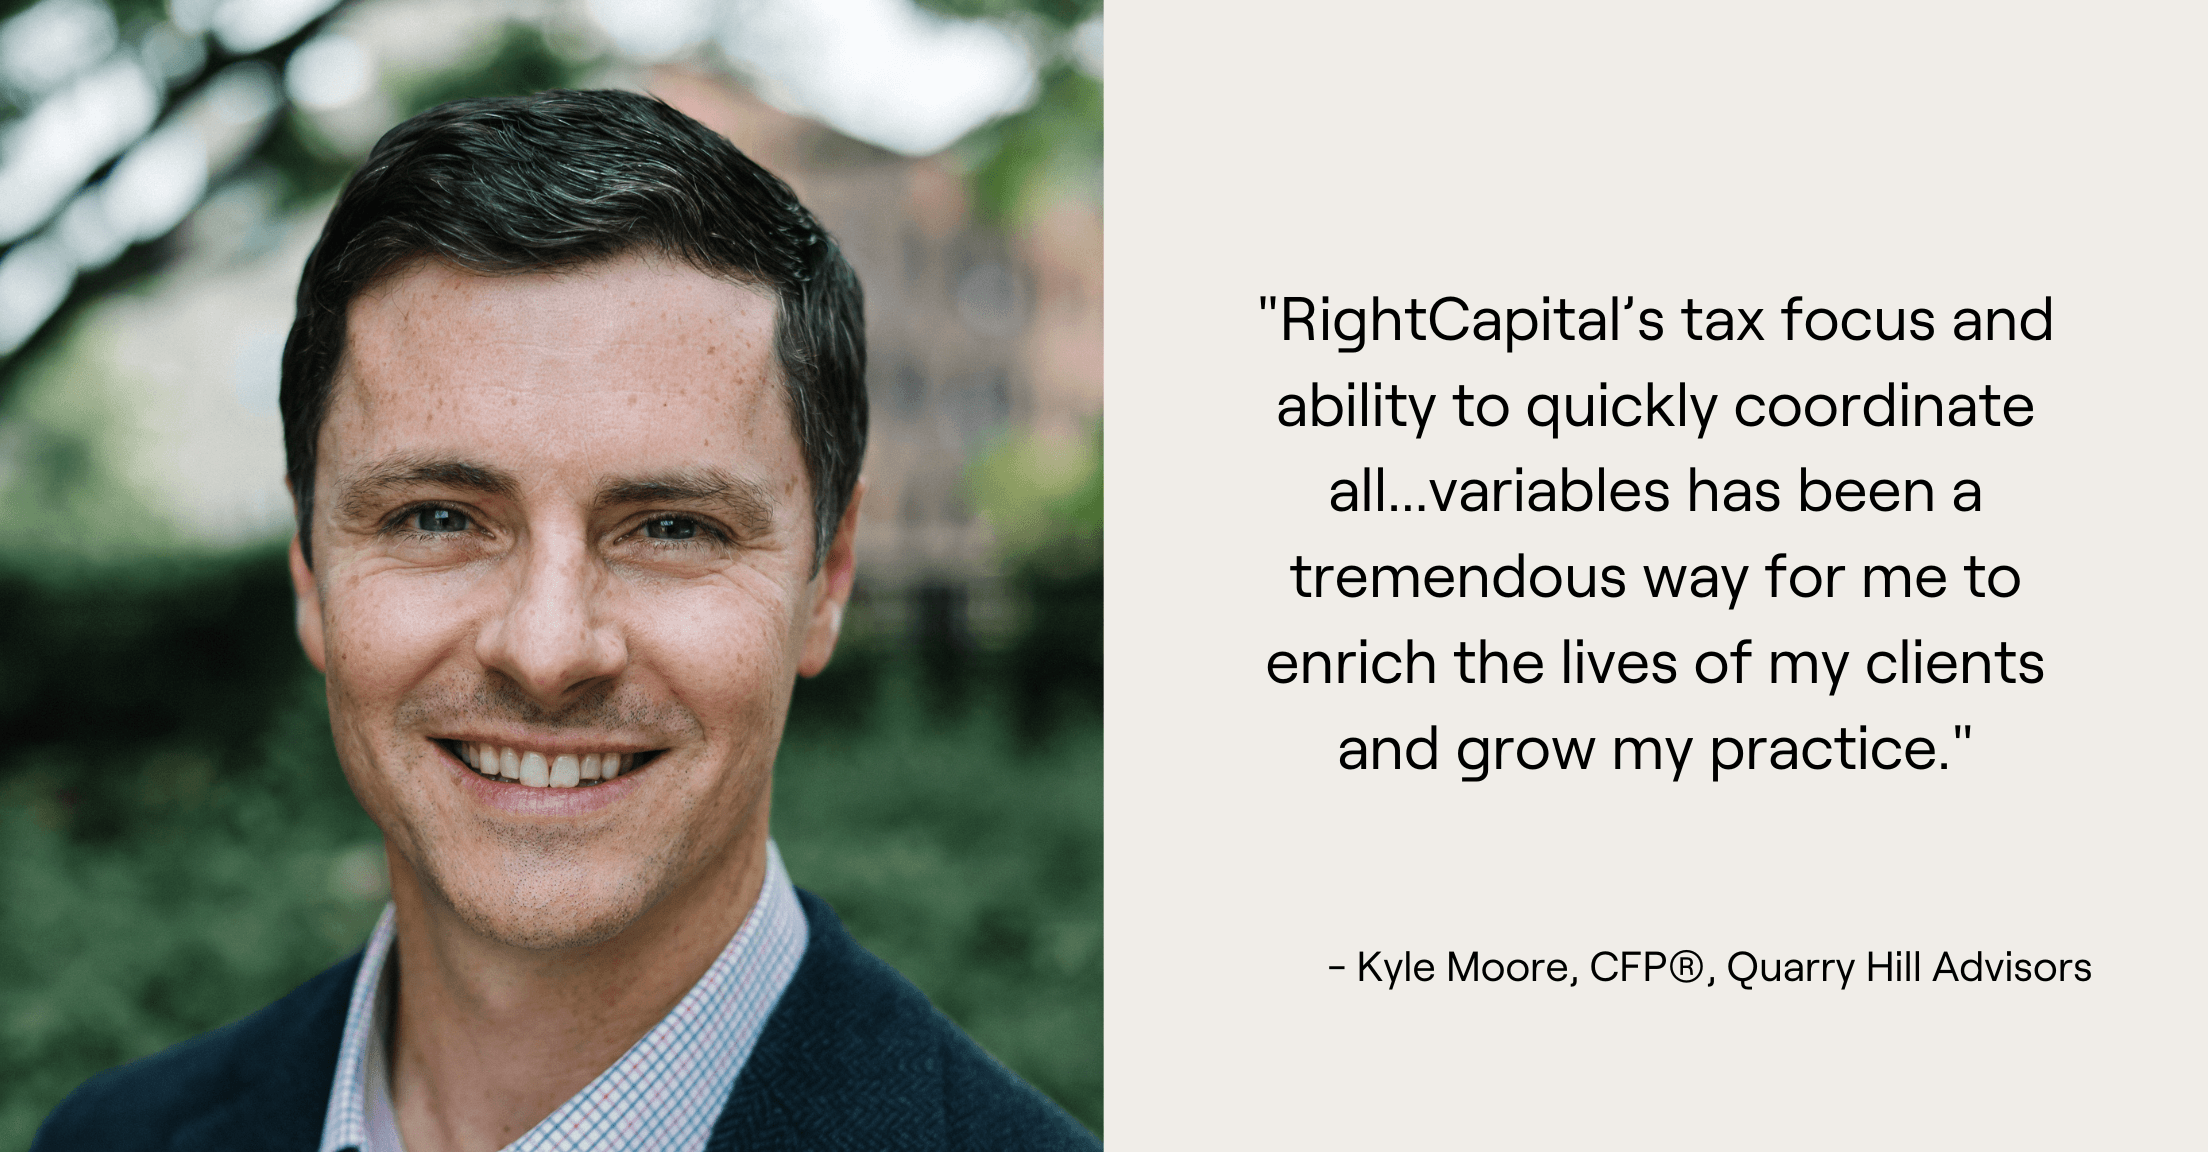 Headshot of Kyle Moore and quote, "RightCapital’s tax focus and ability to quickly coordinate all...variables has been a tremendous way for me to enrich the lives of my clients and grow my practice."